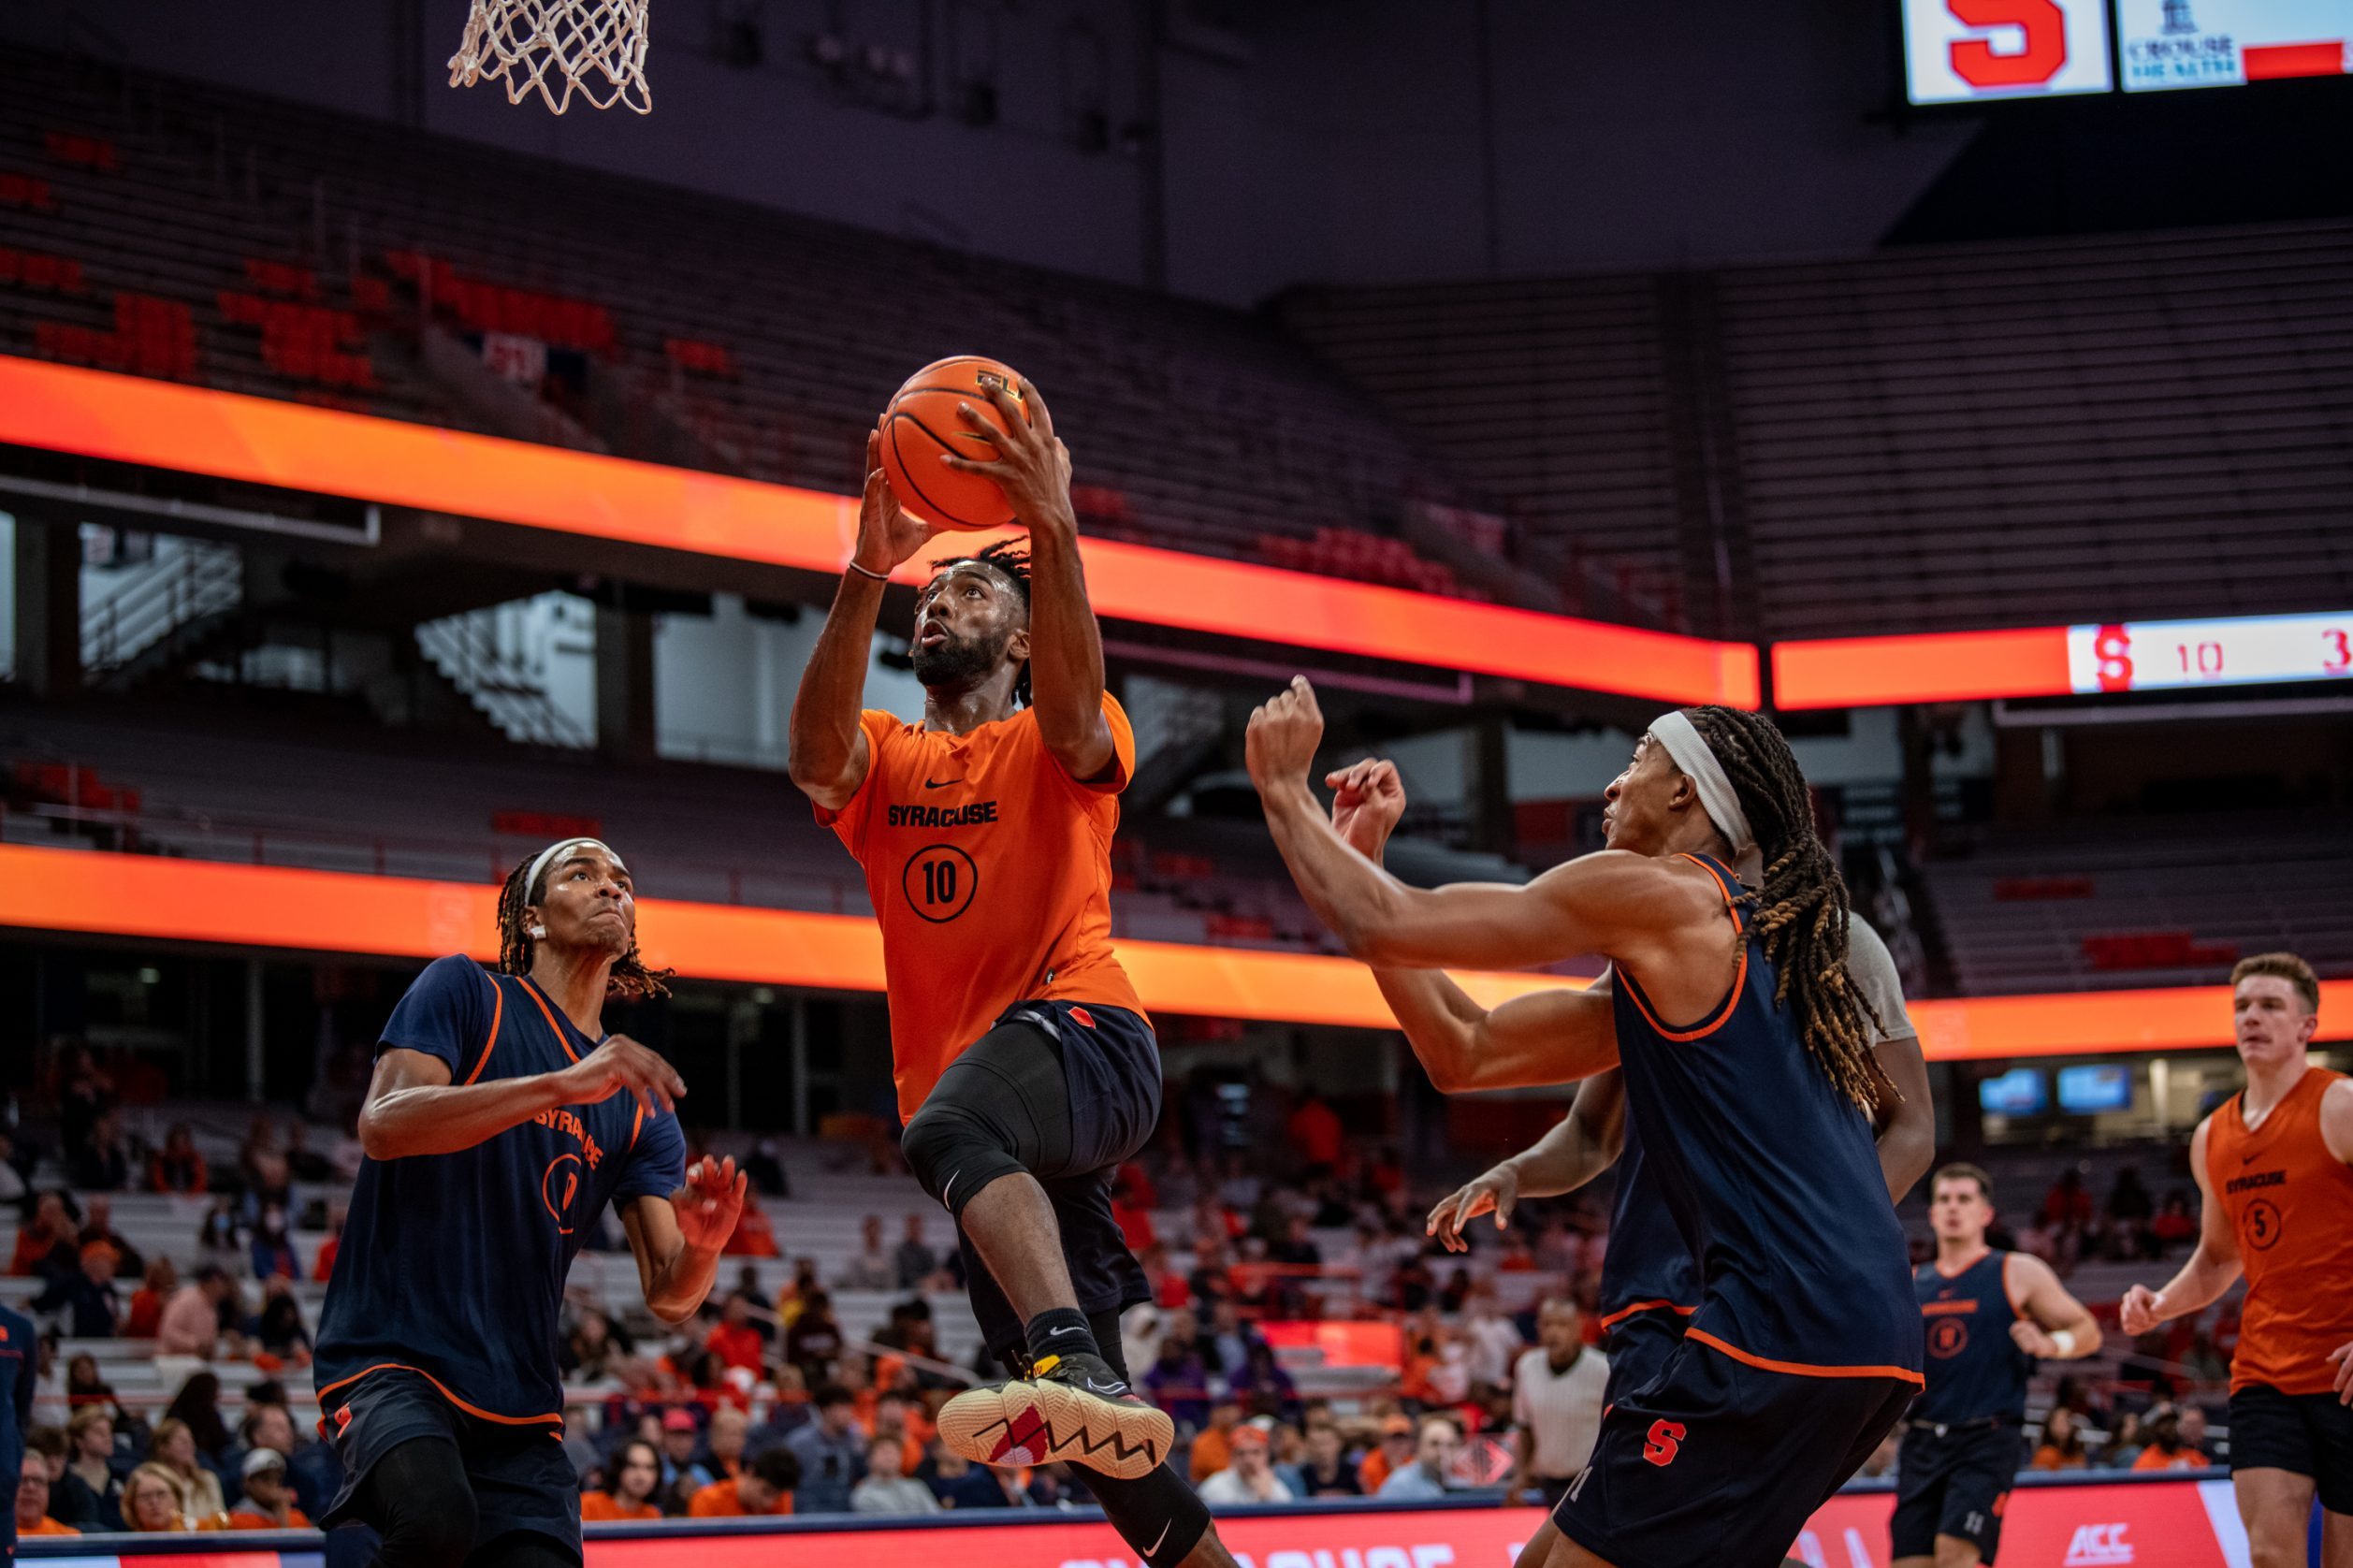 Senior guard, Symir Torrence, during the men's basketball scrimmage, at the Orange Tip Off fan event. Photo by Ryan Brady. 10/14/22